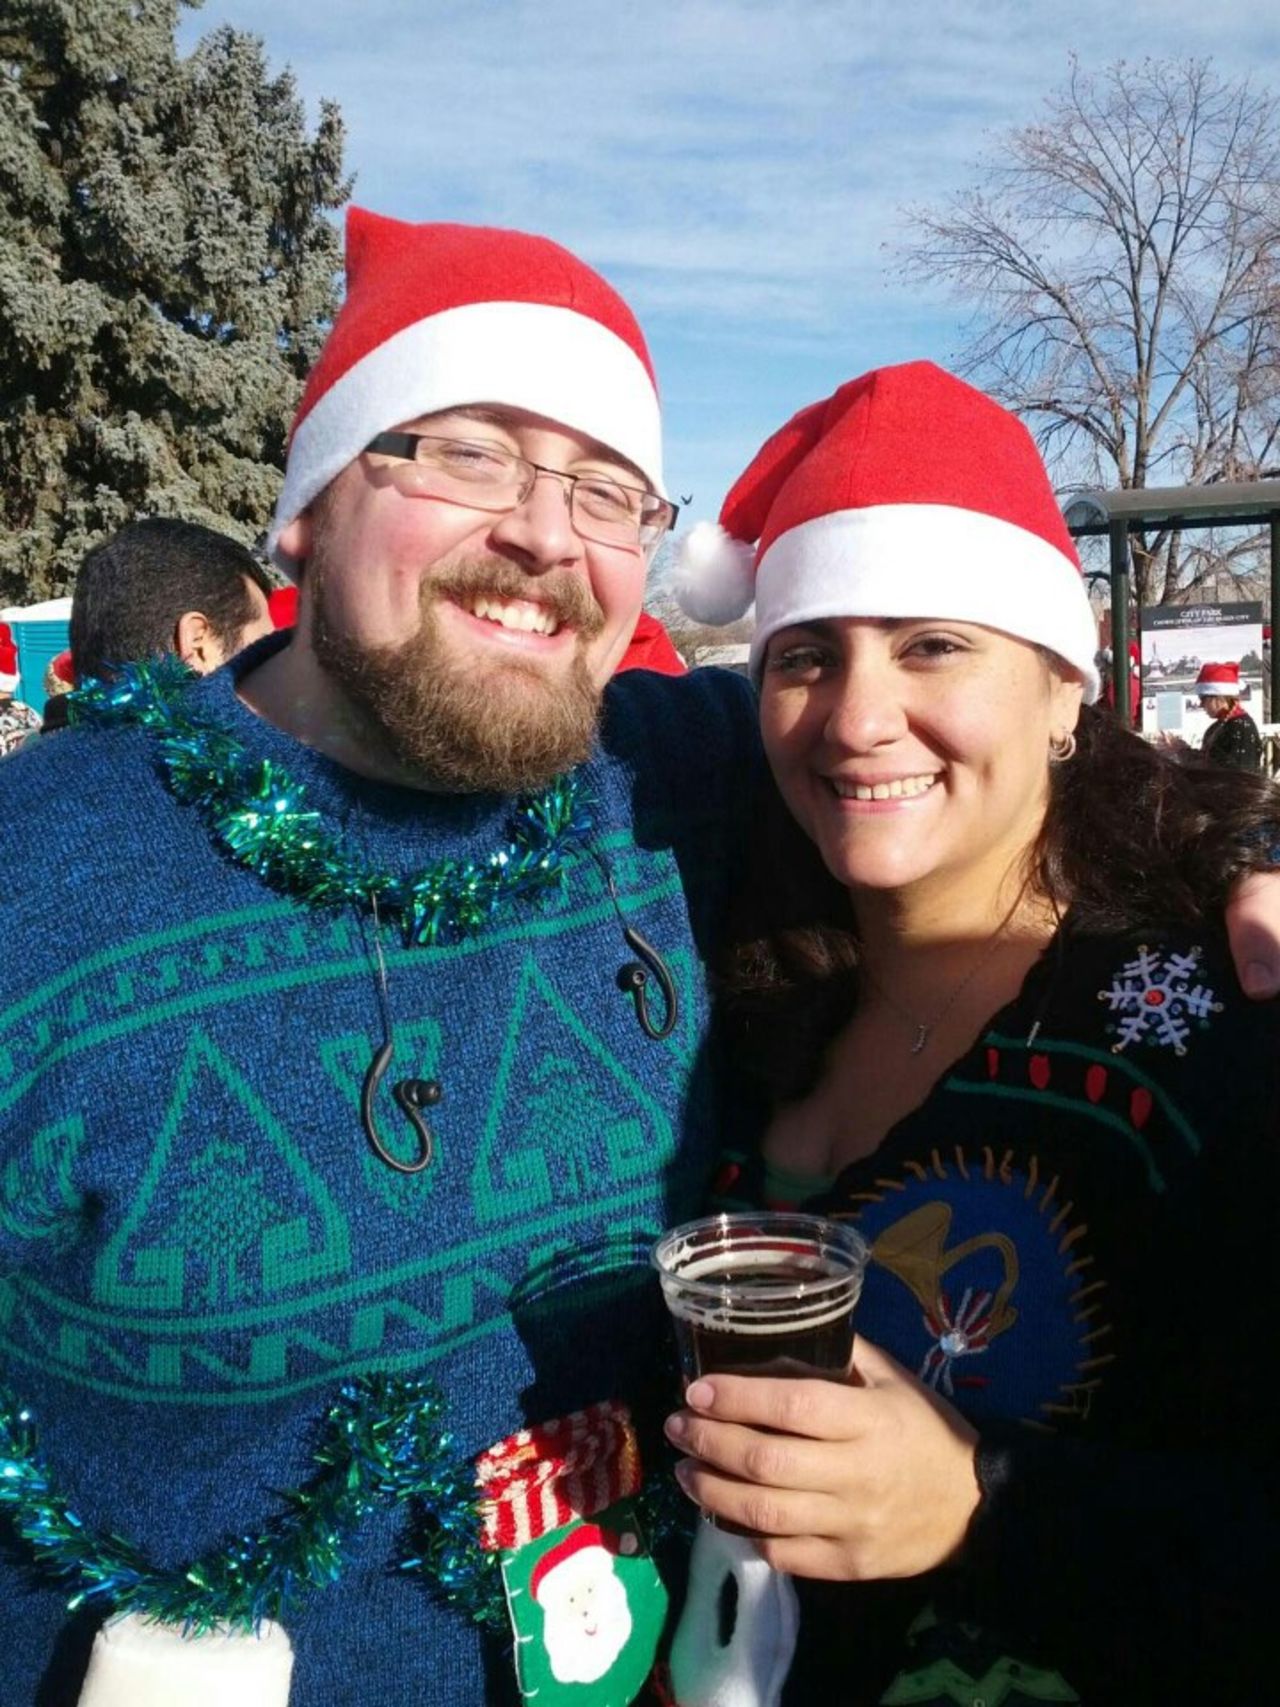 In December 2012, the couple ran the local 5-kilometer "Ugly Sweater Run." Jess finished ahead of Rob, and he vowed to improve his time.